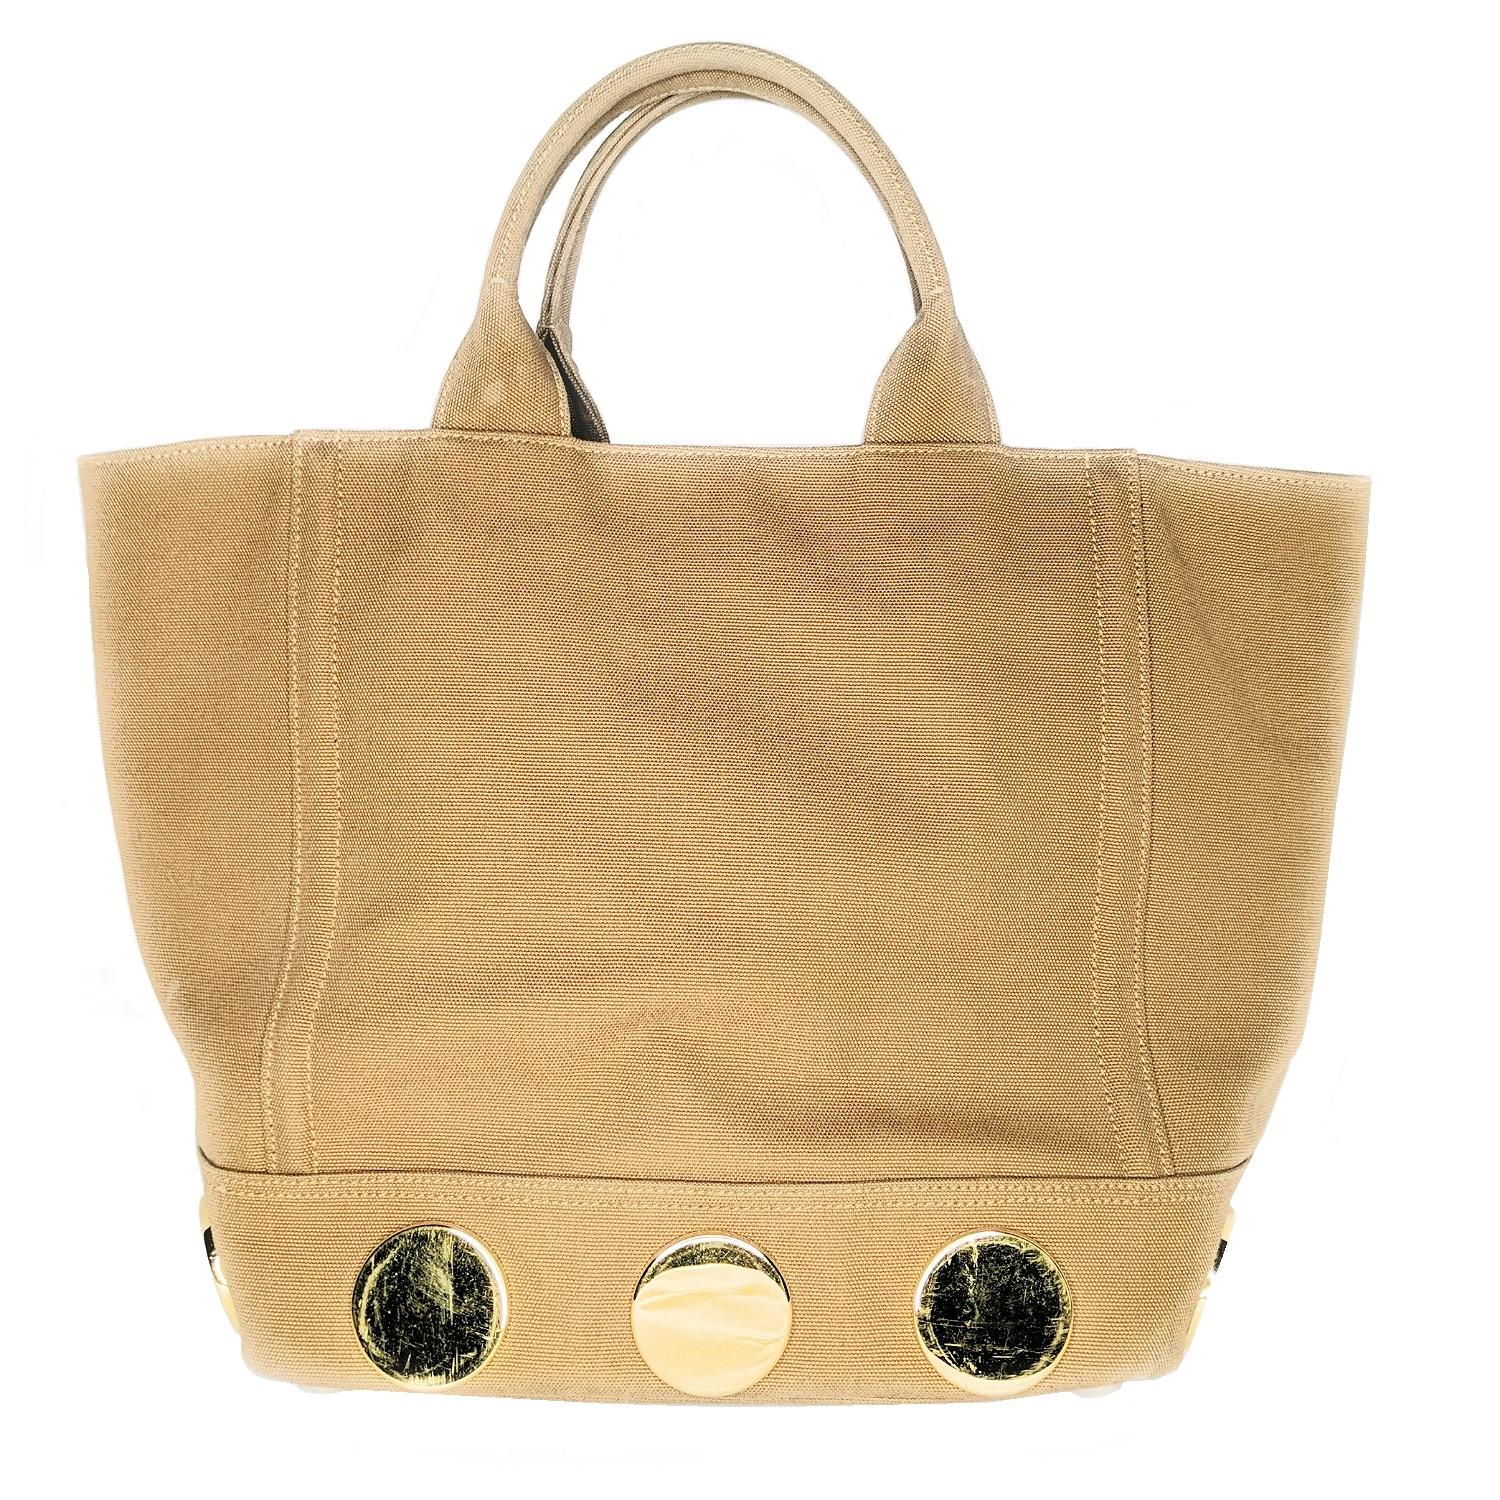 This urban chic tote is made of canvas in a tobacco color with golden hardware and tonal topstitching. The lower part of the bag has nine large gold-tone accented discs making this a bit on the heavy side, weighing in at 2.8 lbs. Open top with